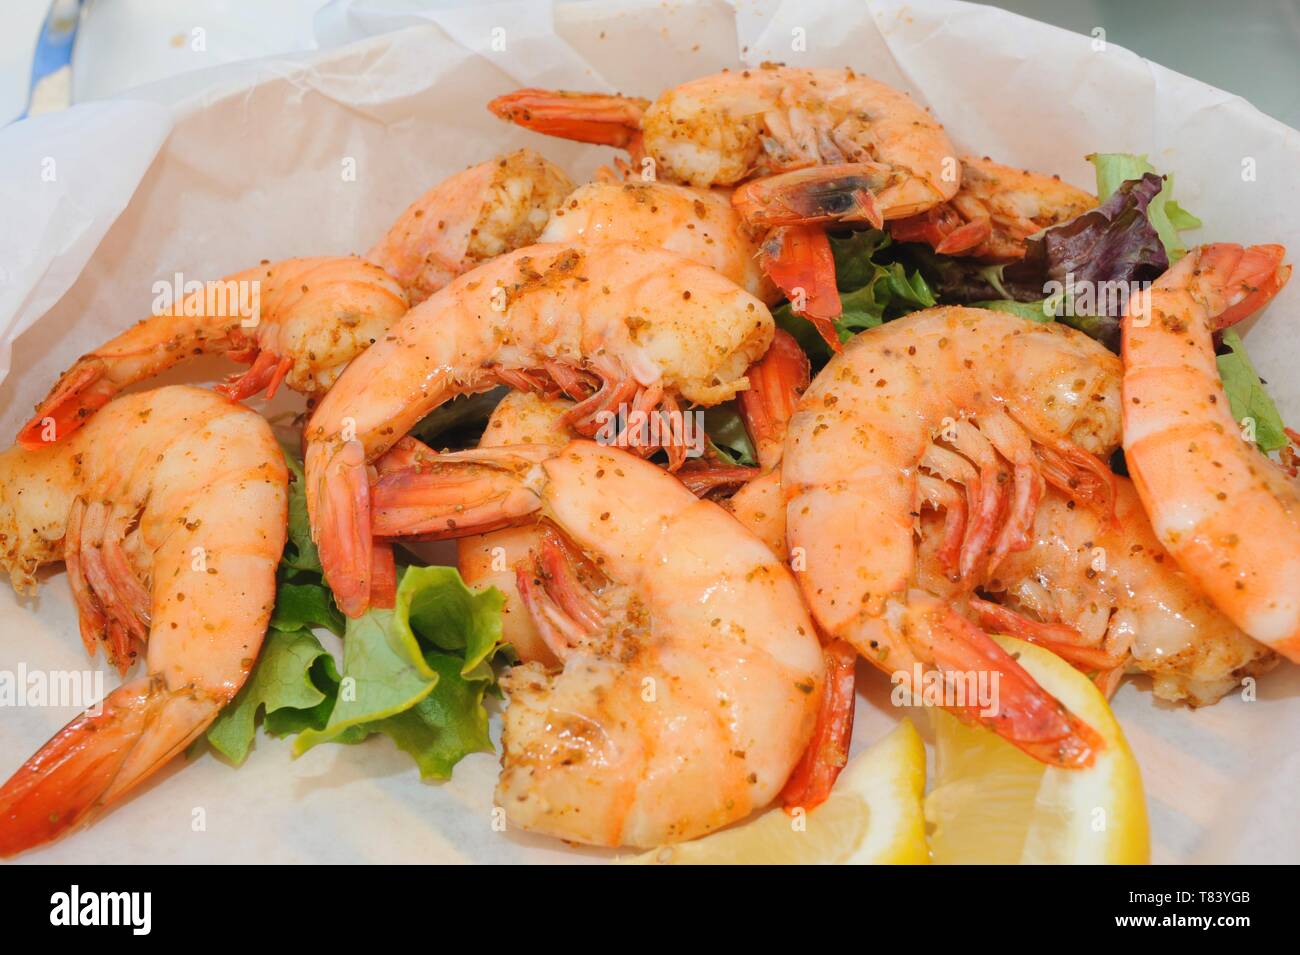 Close up of plate with delicious, mouthwatering, cooked, whole, fresh Key West Pink Shrimp with lemon slices, Key West, Florida, USA Stock Photo